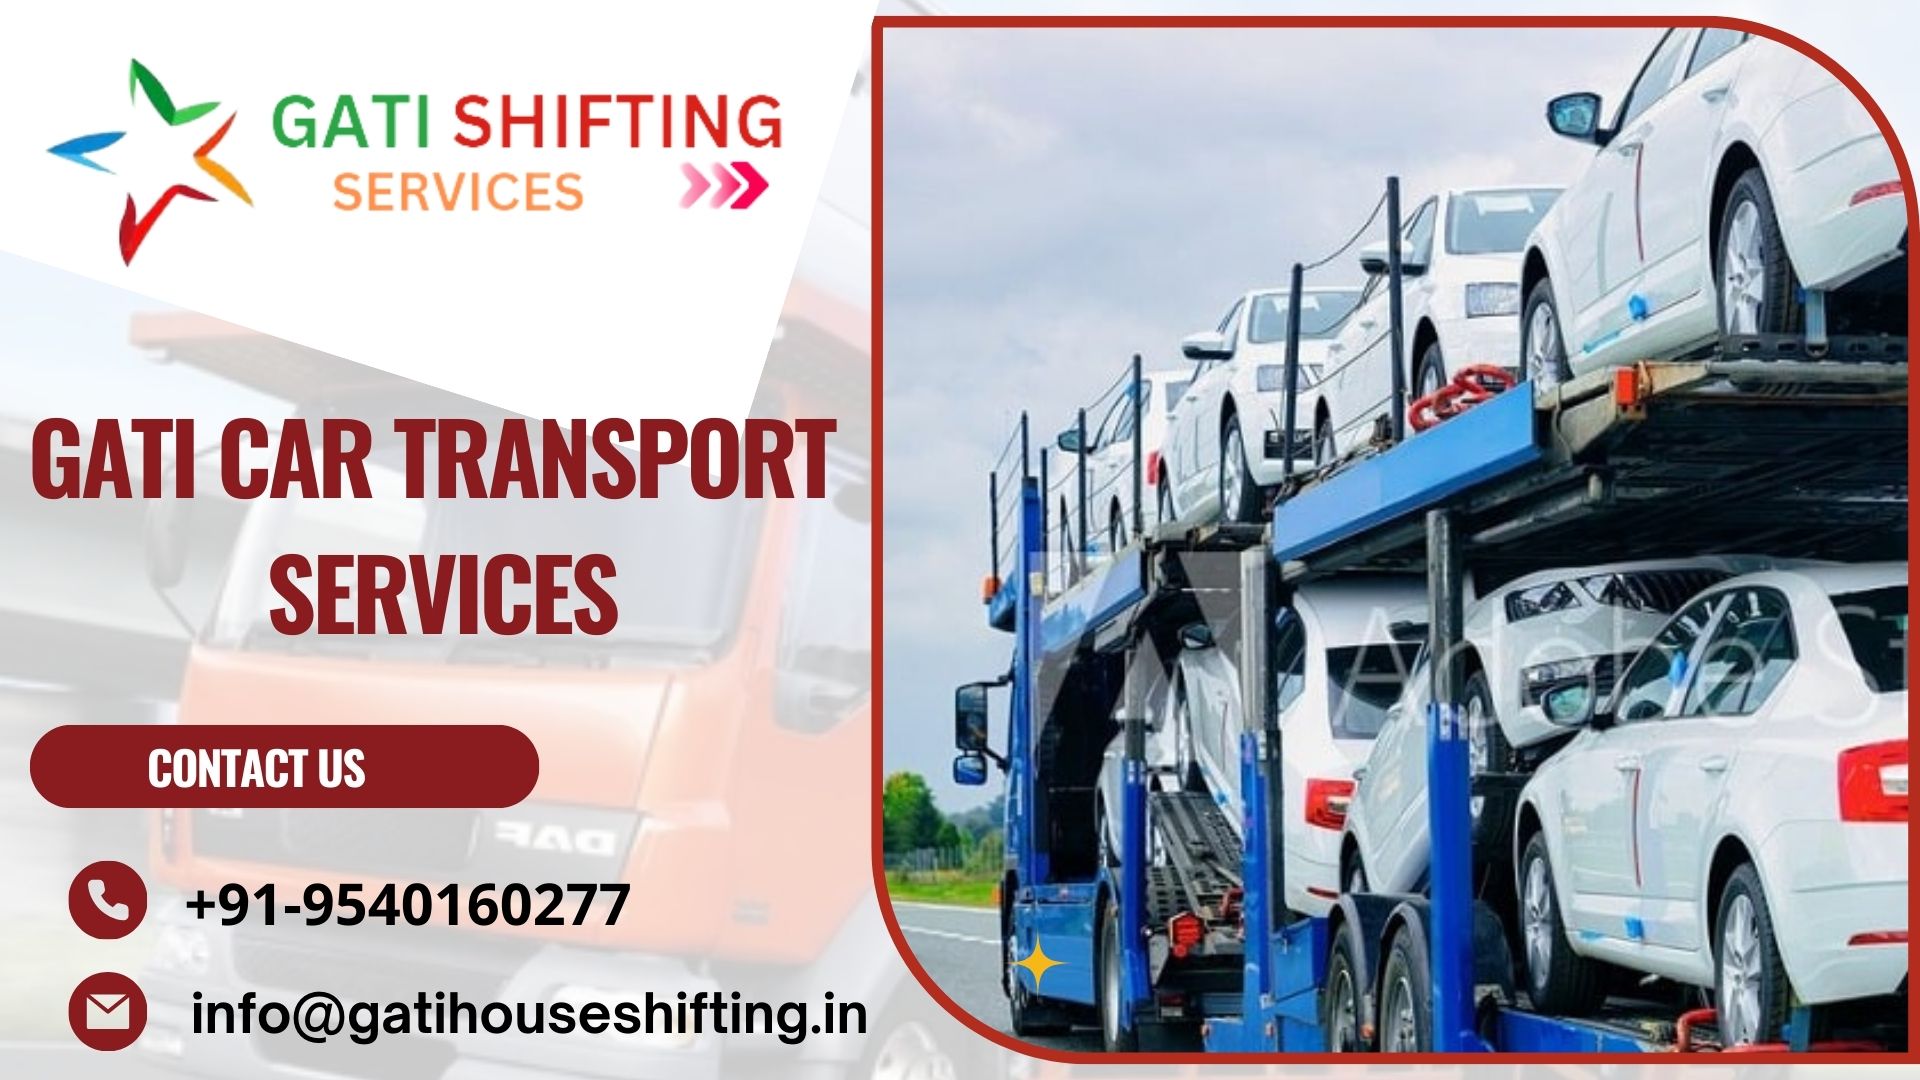 Car transport services from Delhi to Guwahati